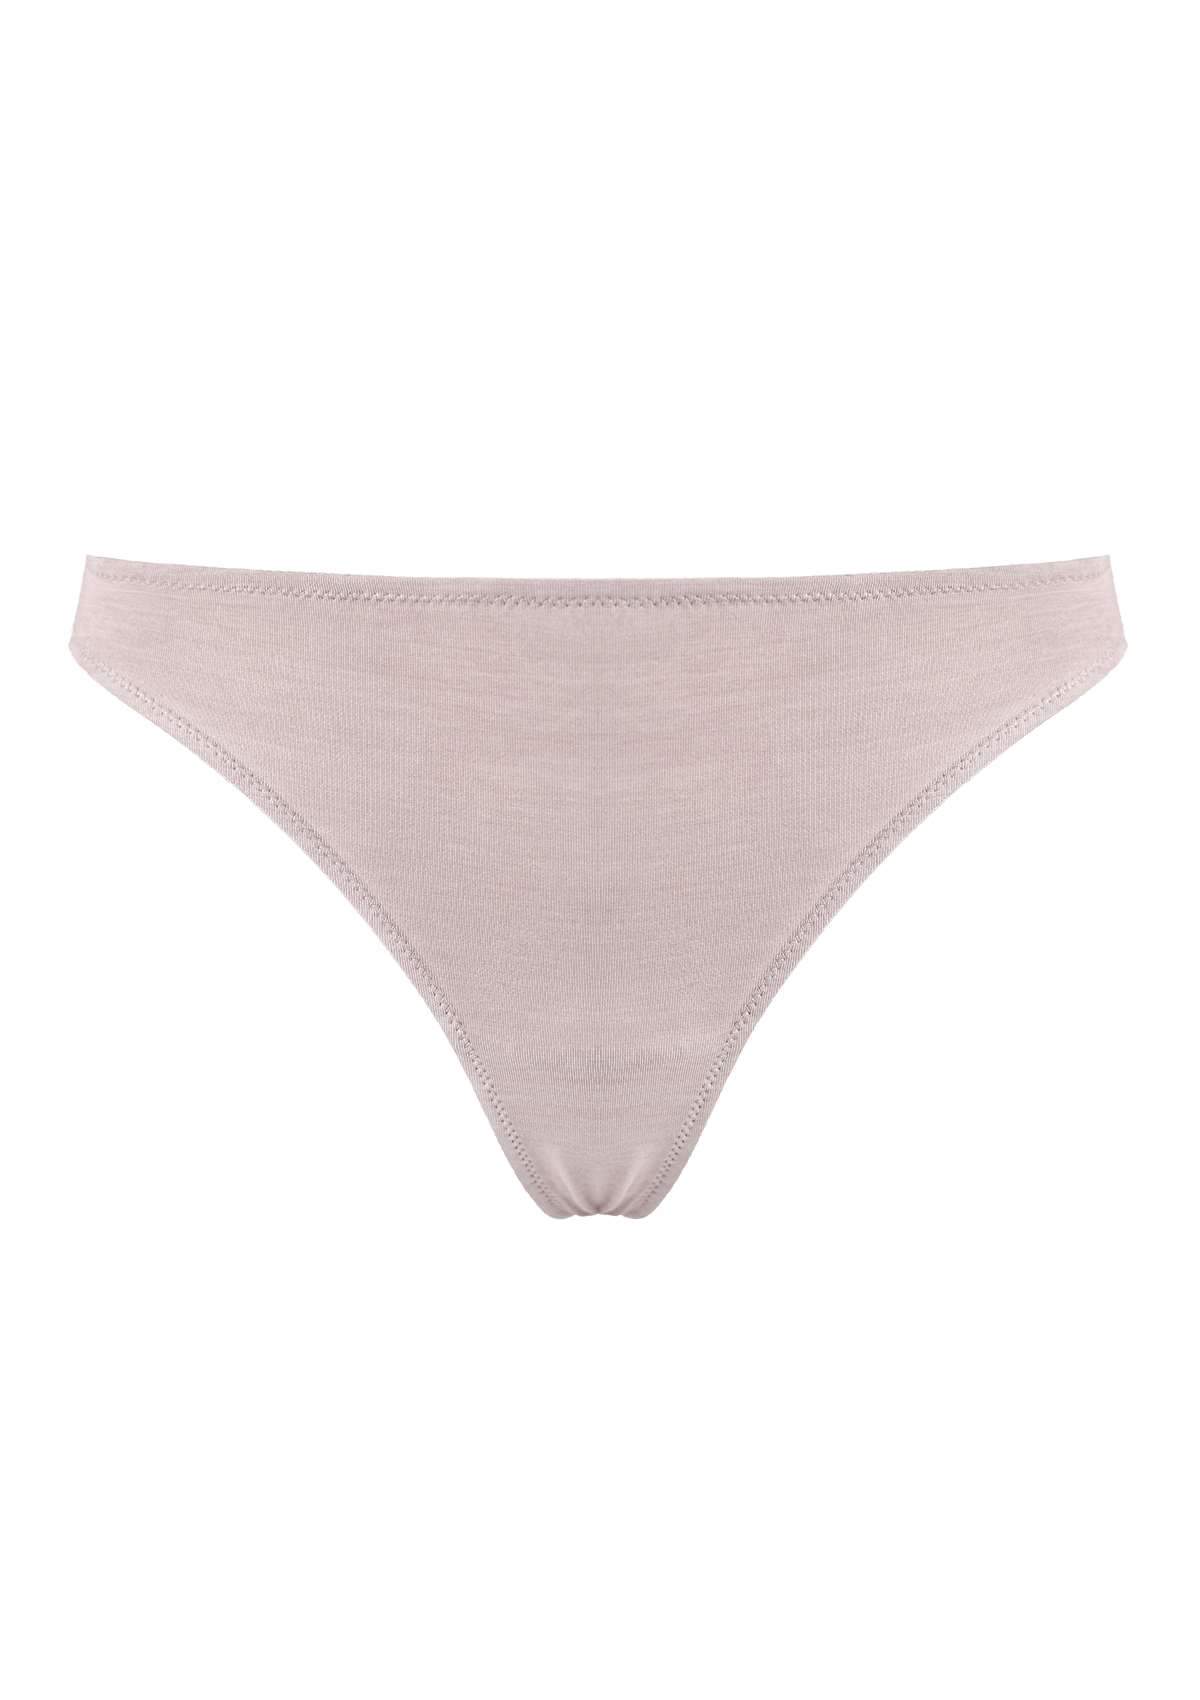 HSIA Comfort Cotton Thongs 3 Pack - L / Beige+Black+Pink